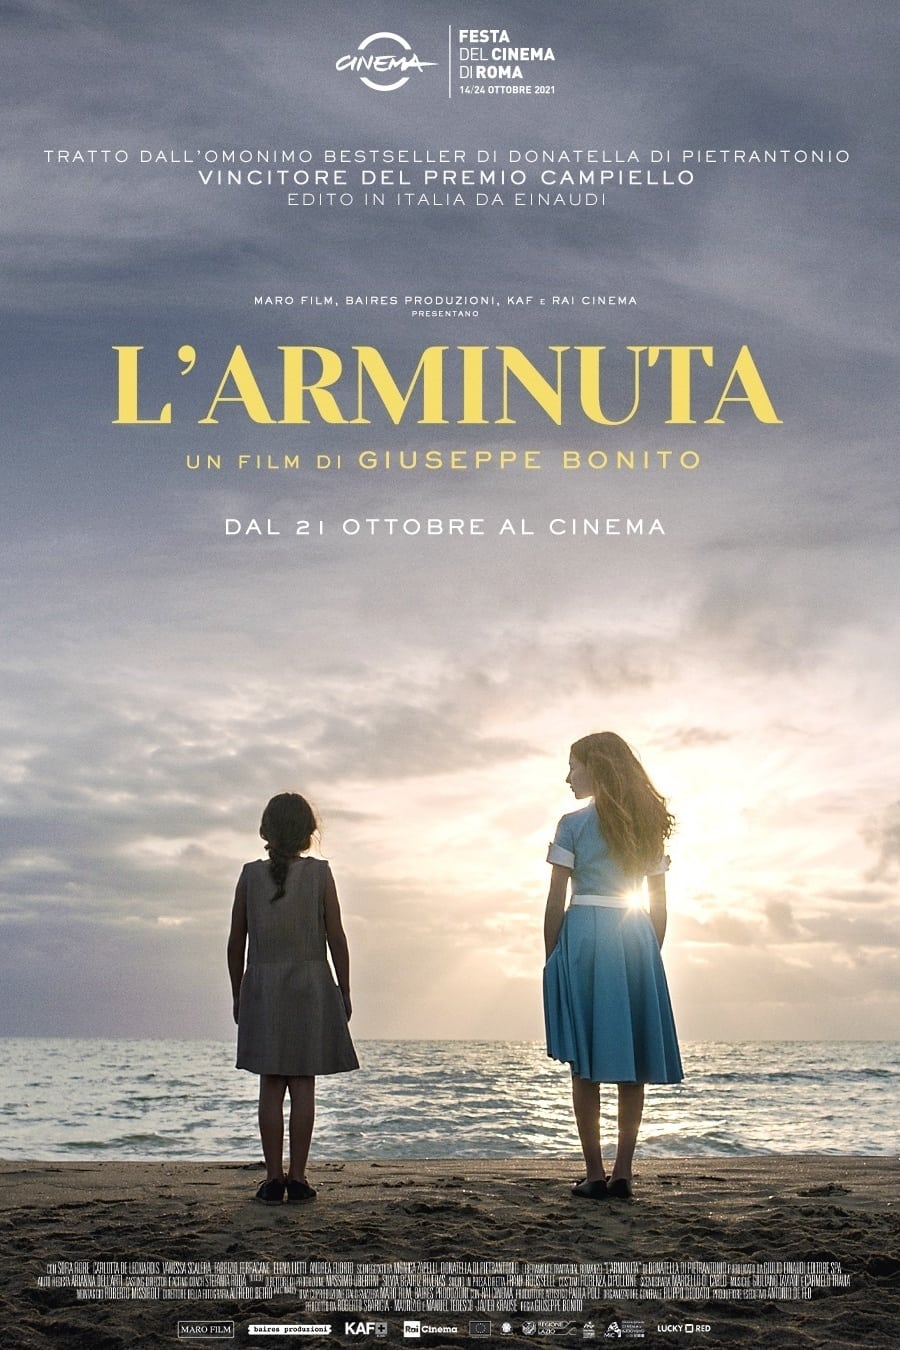 Poster for the movie "L'arminuta"